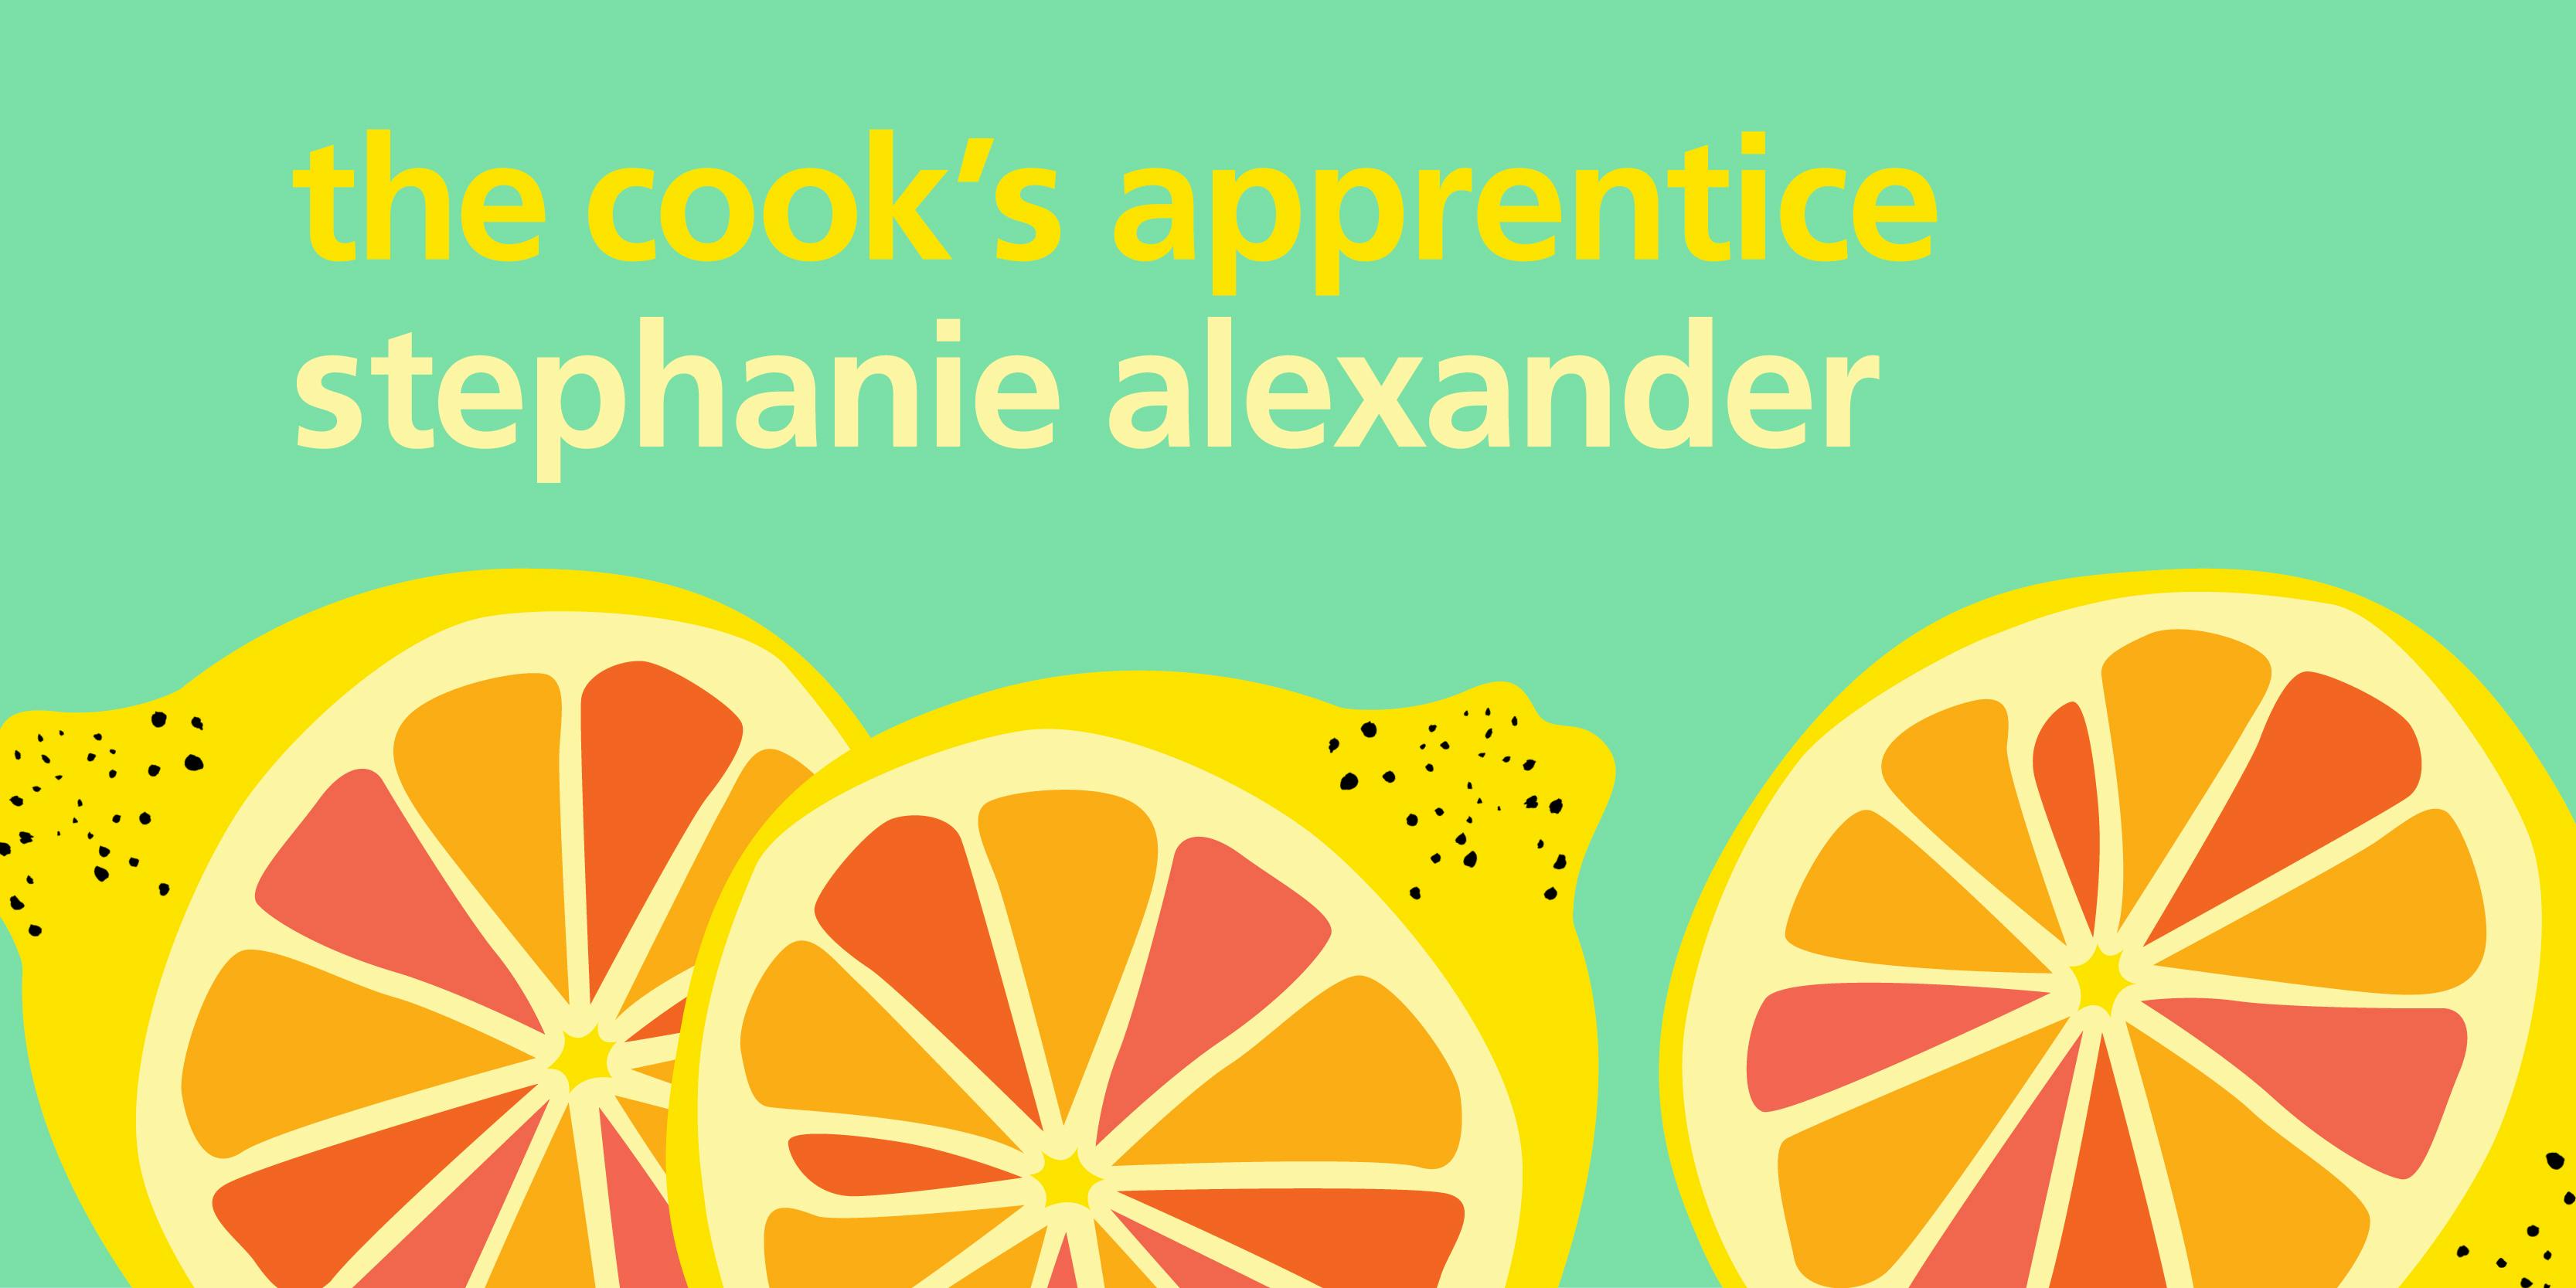 A guide to The Cook’s Apprentice